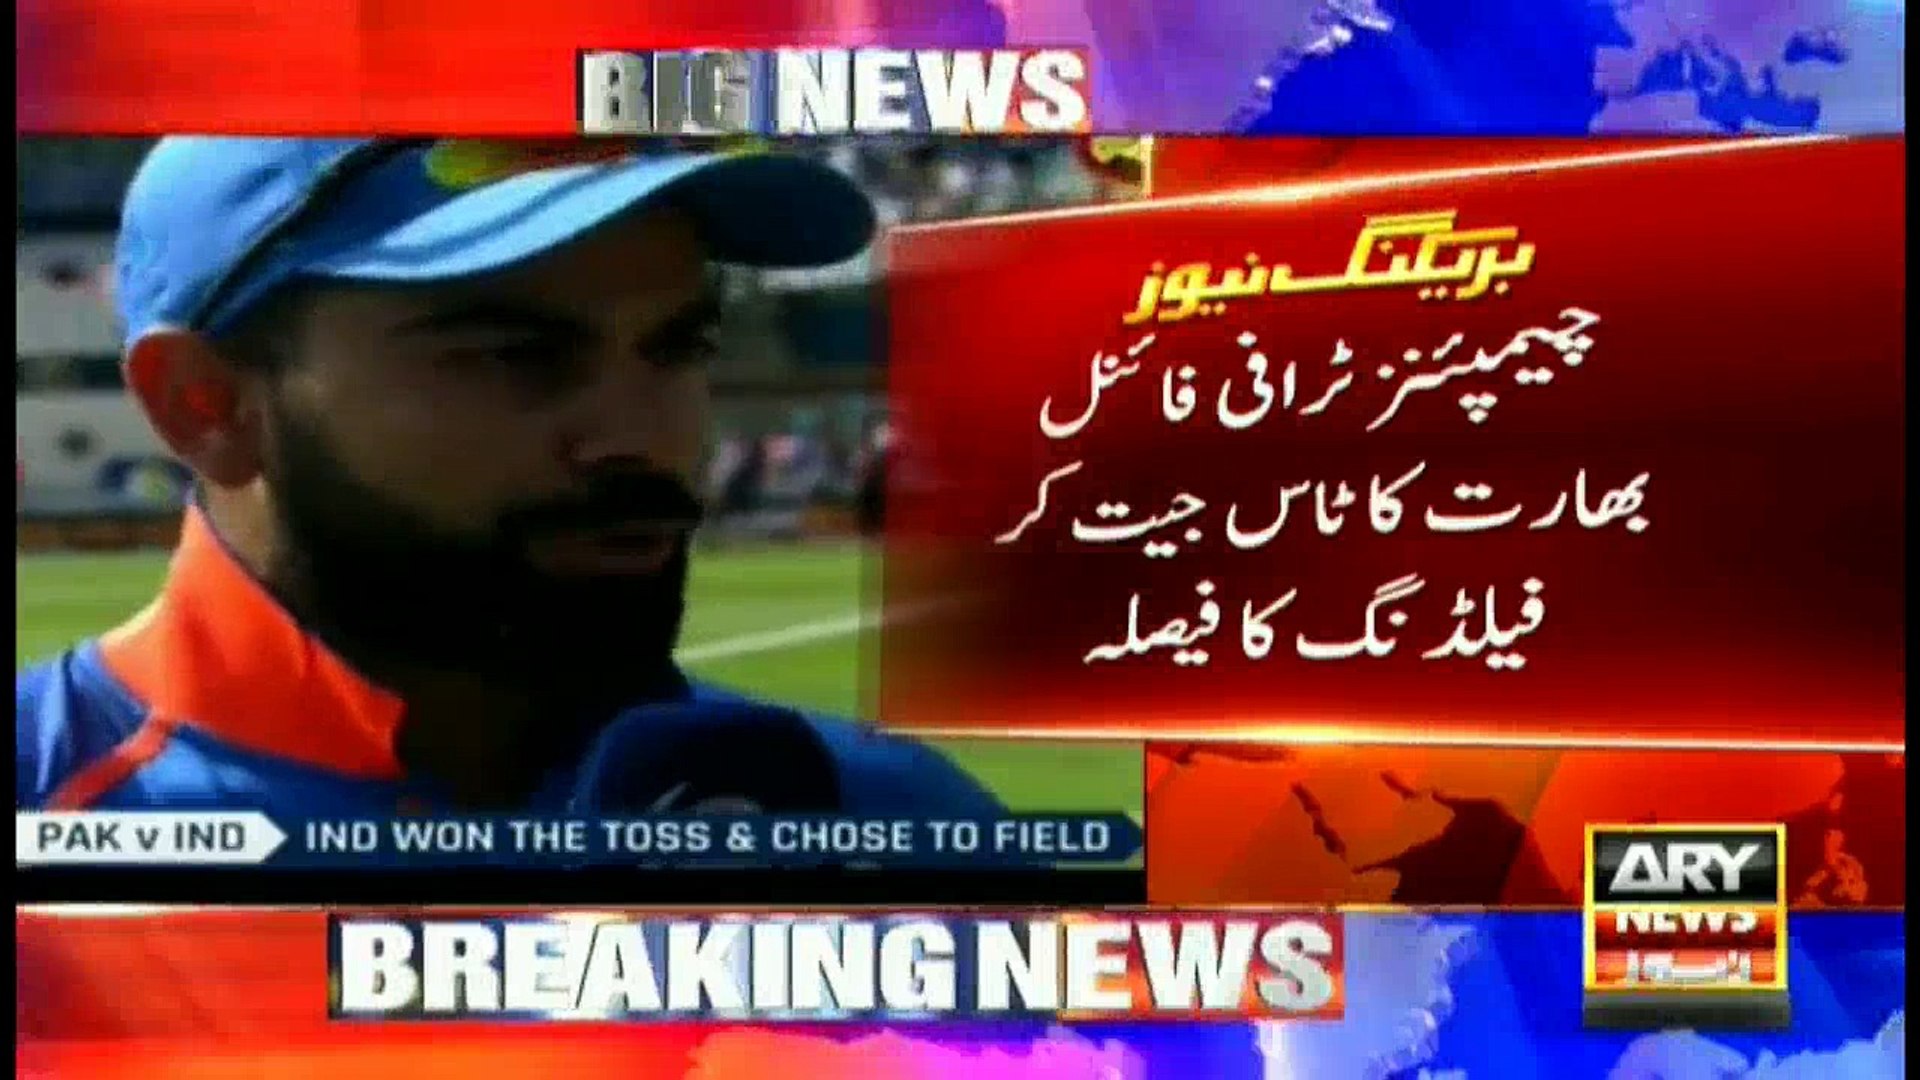 PAK vs IND ICC Champions Trophy: Captain of both teams share their thoughts